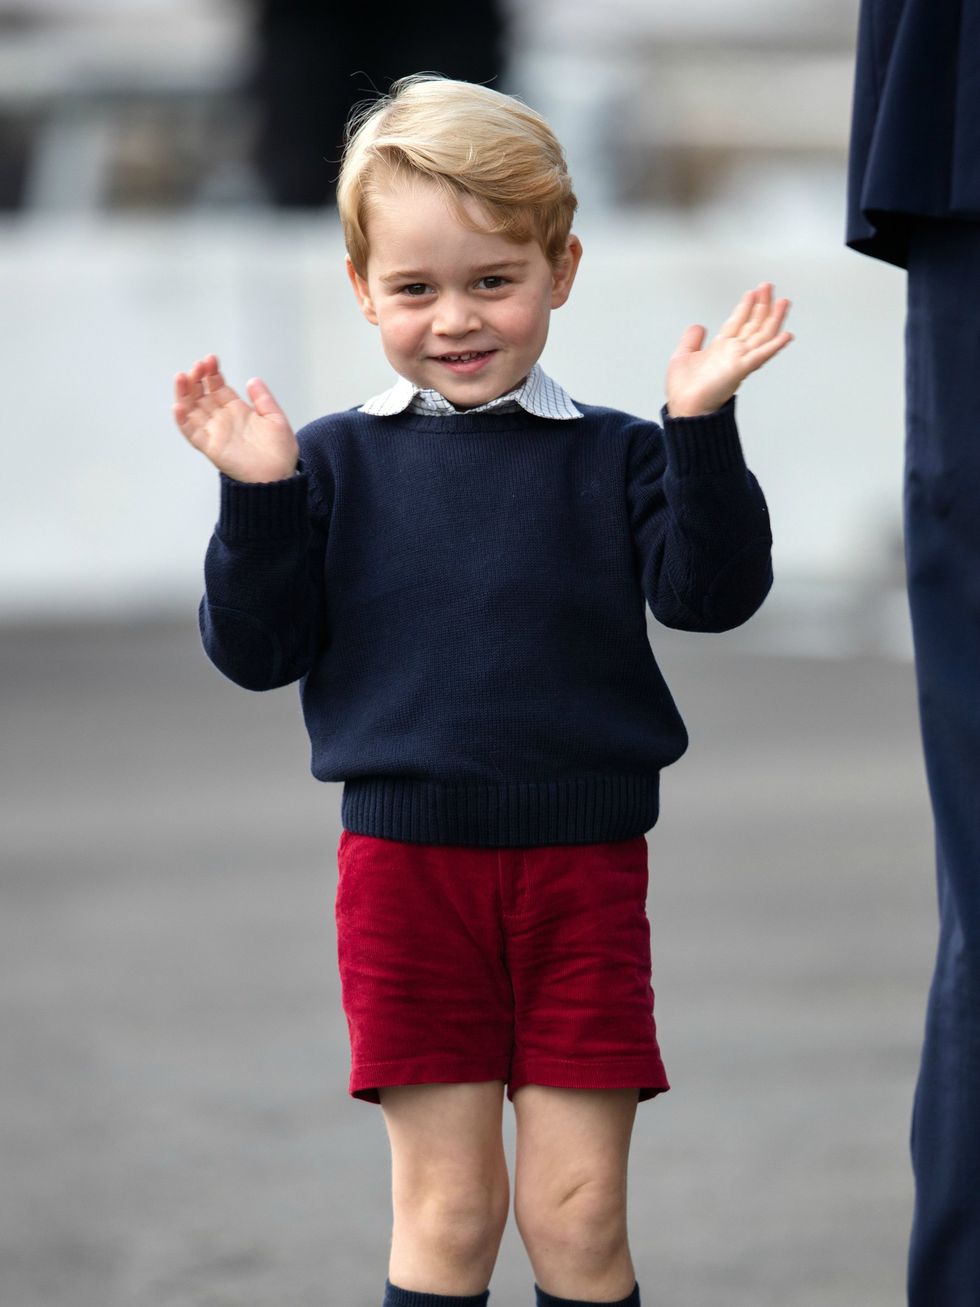 Royal tour of Canada -- Duke and Duchess of Cambridge with Prince George and Princess Charlotte